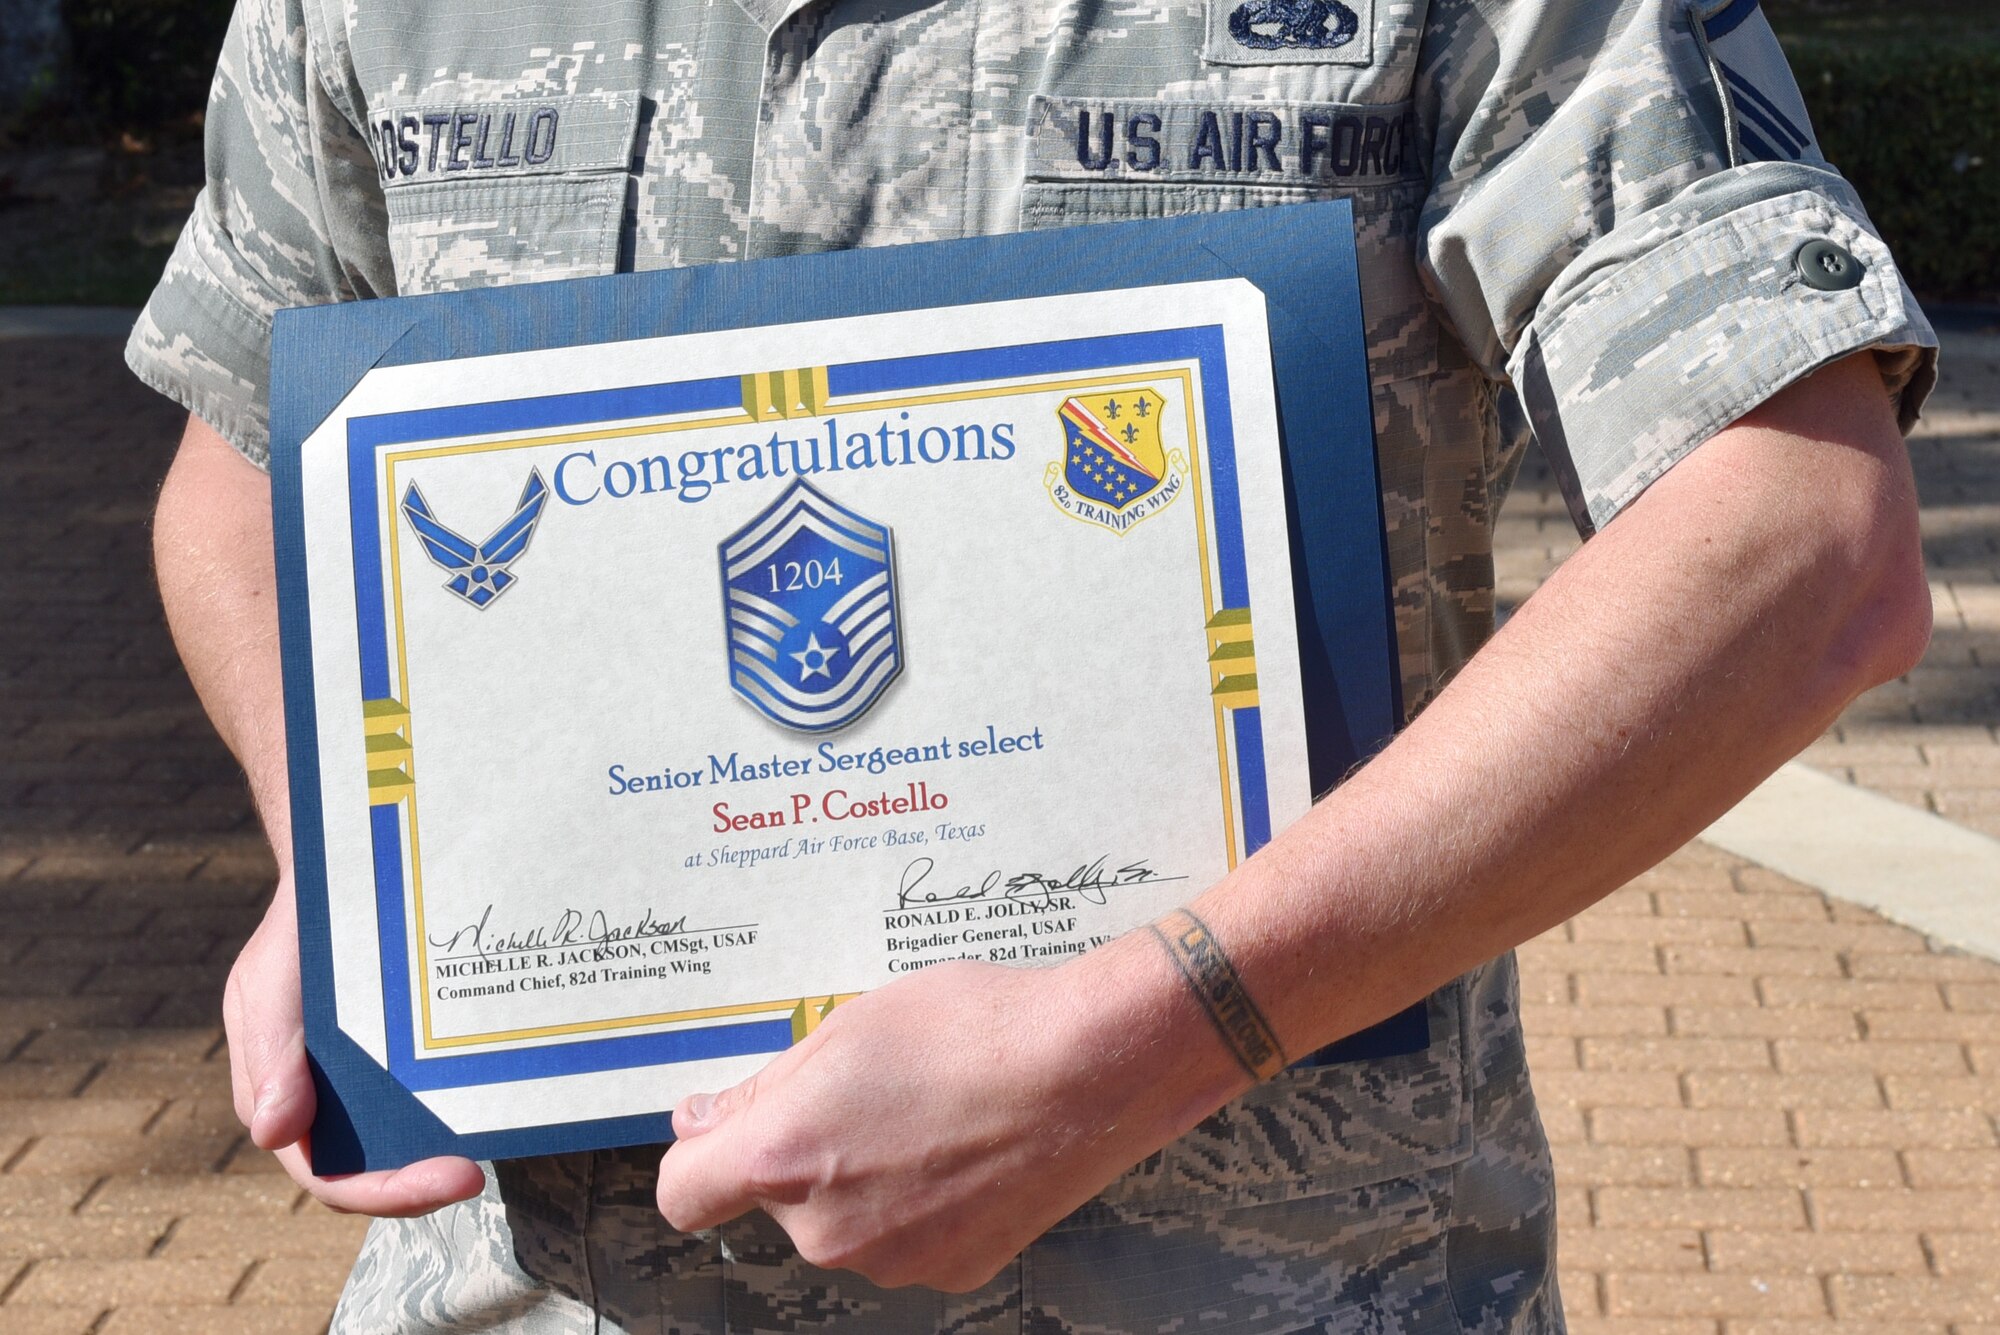 Cancer Battle Inspires Life Of Service Sheppard Air Force Base News